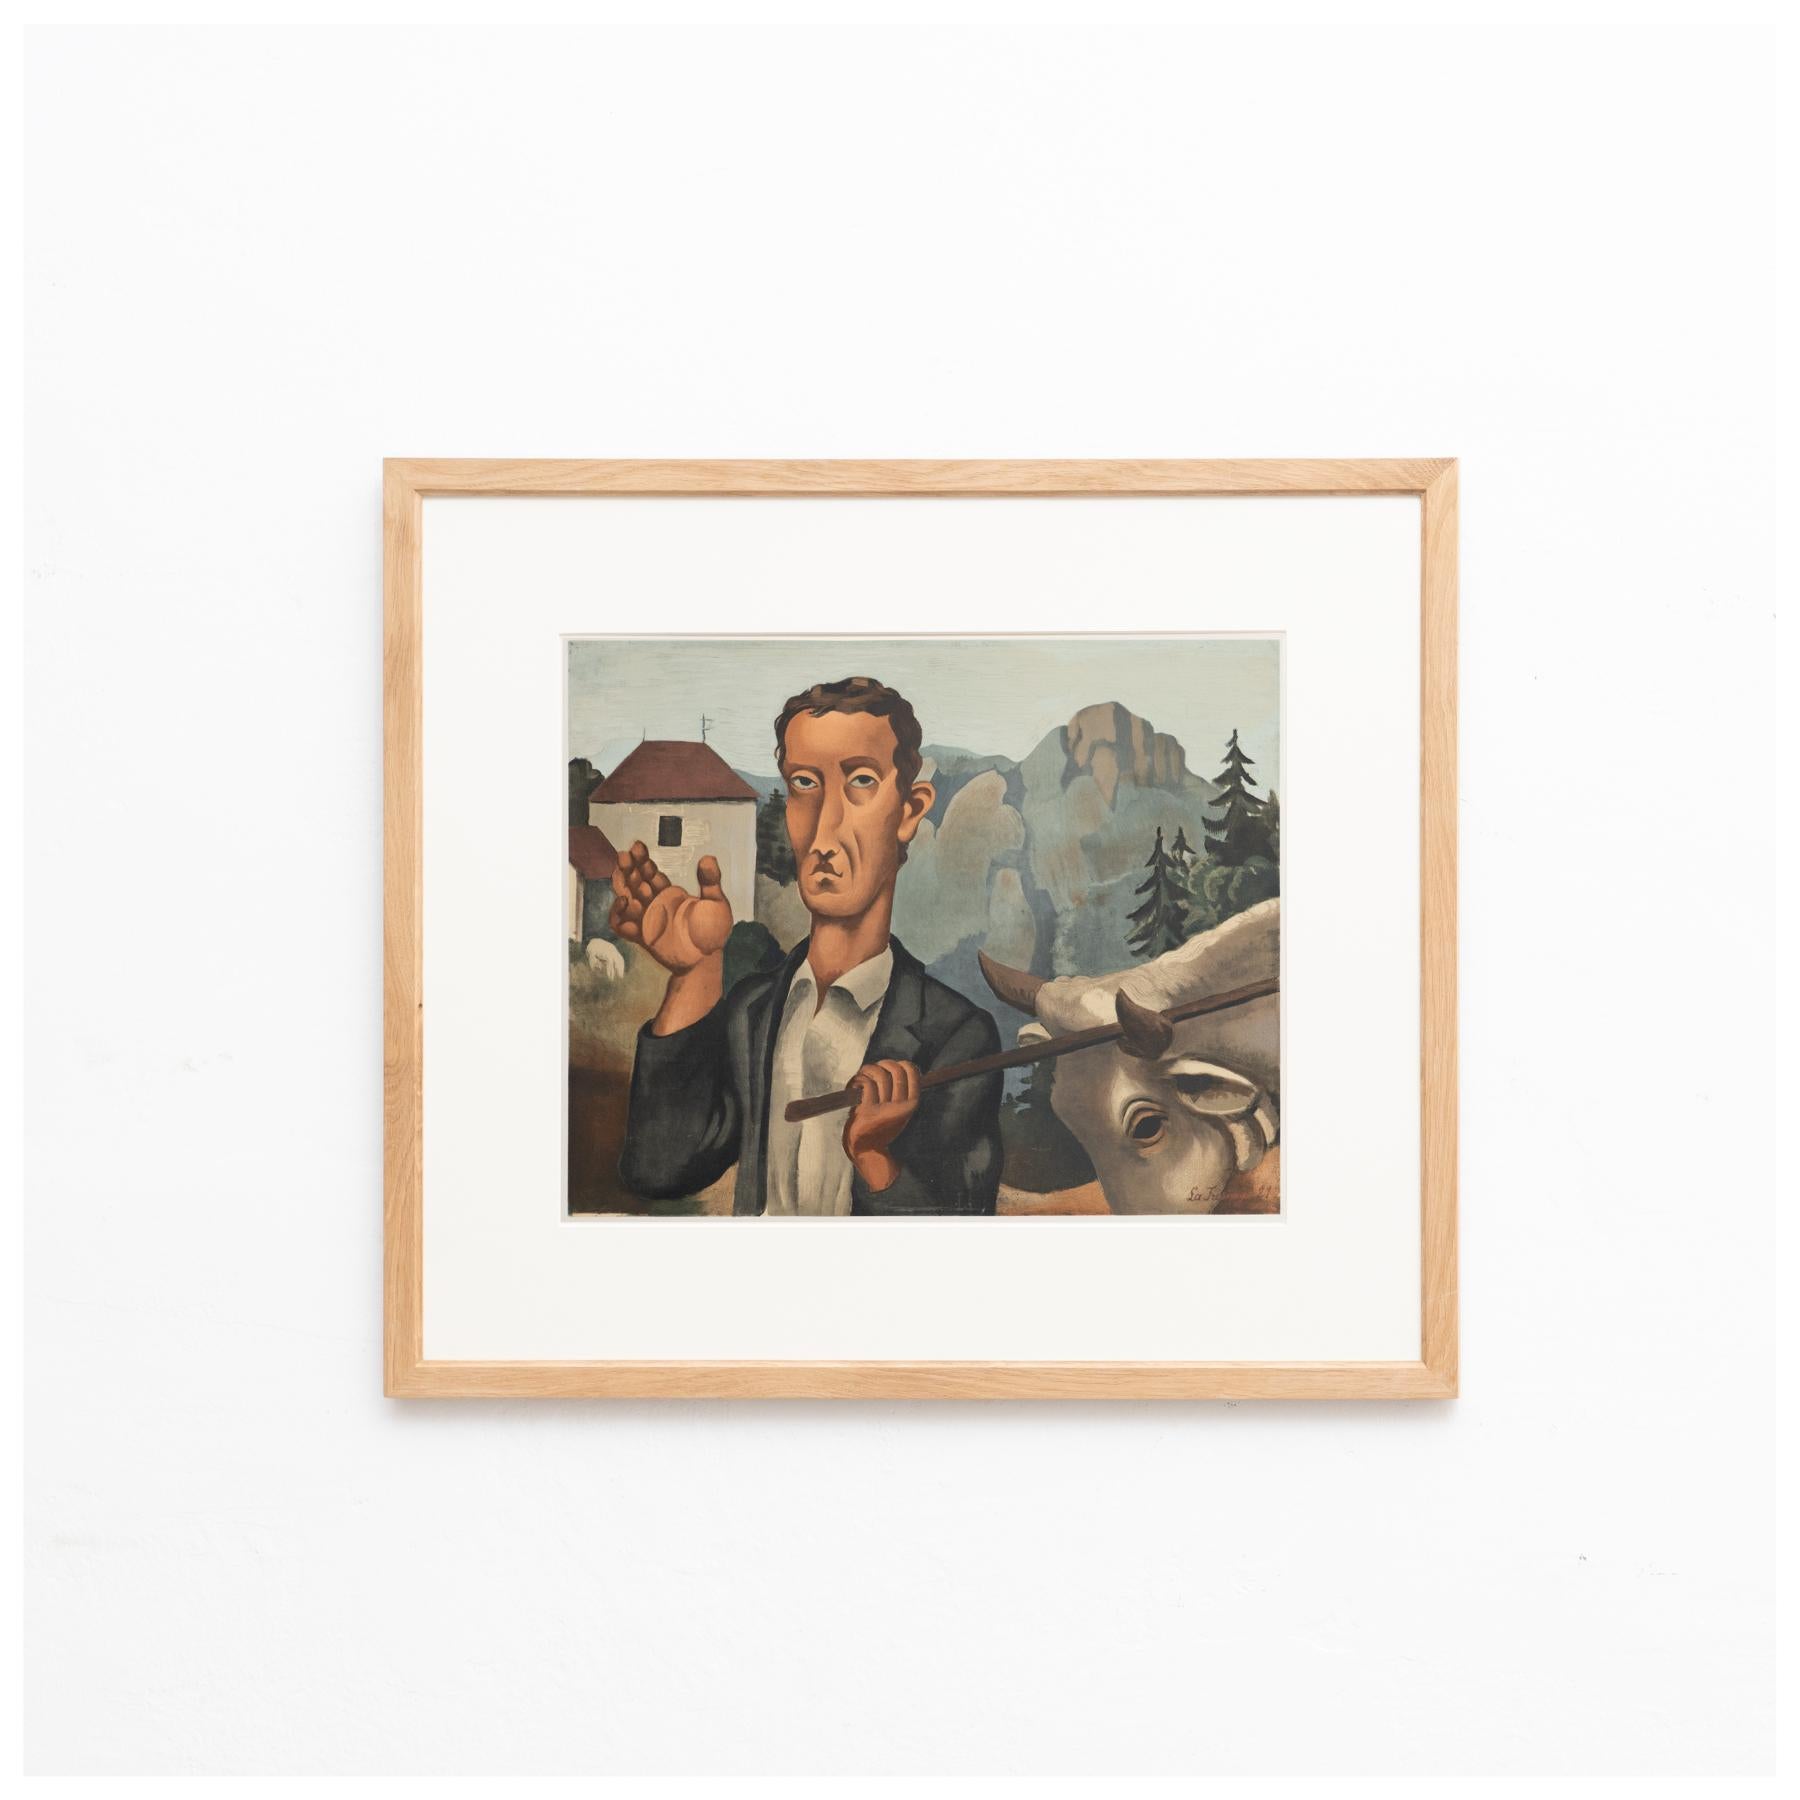 Original color lithograph 'Le Bouvier' by Roger de la Fresnaye.

Lithograph printed from an original painting made by the author in France, circa 1921.

Framed in Barcelona by an artisan framer in natural oak wood.

Frame will be slightly